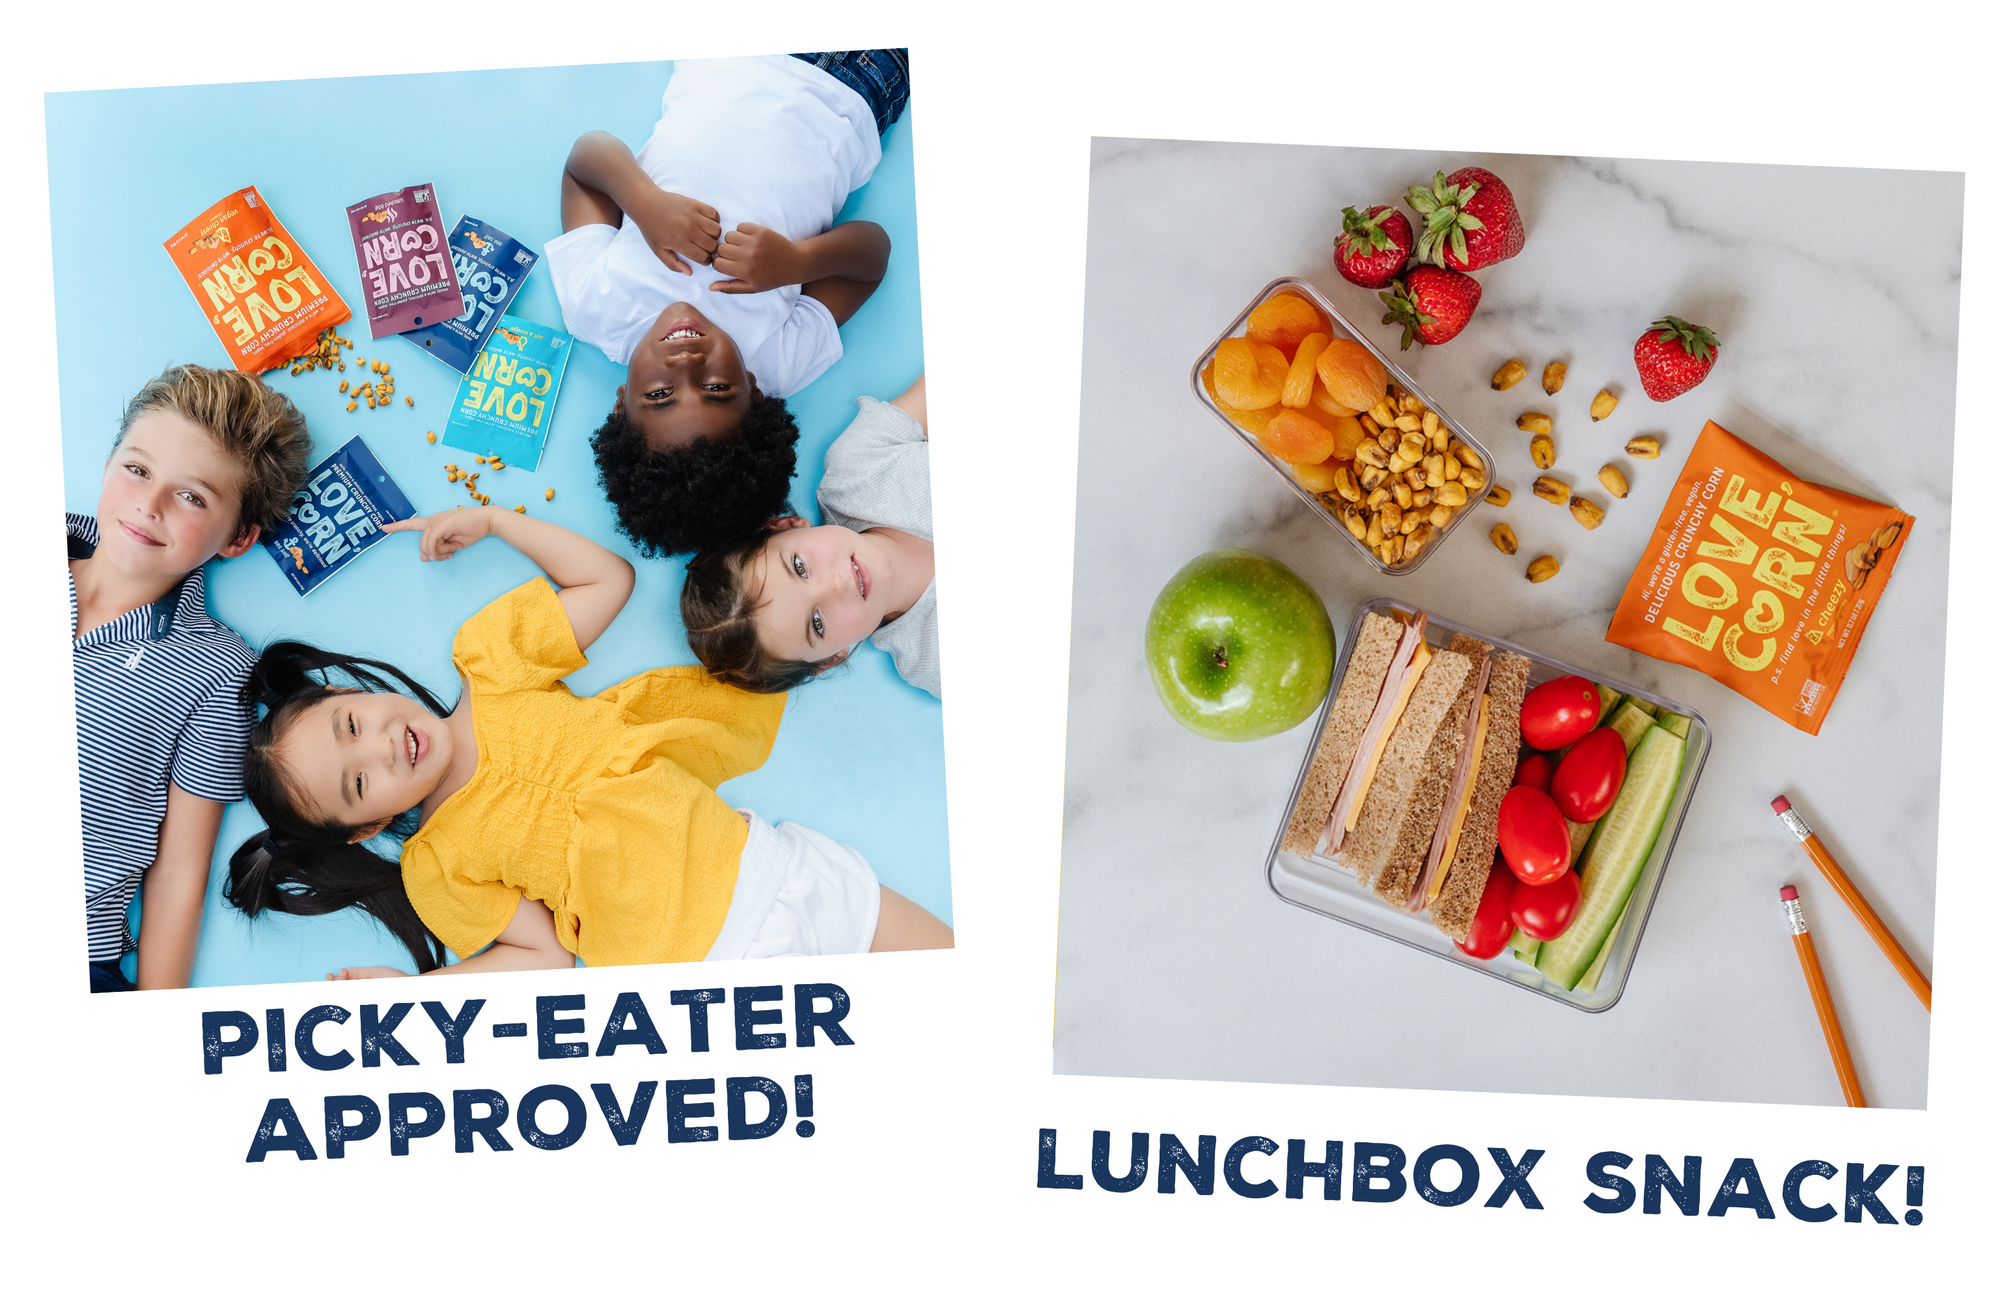 Picky Eater Approved! Lunchbox Snack!